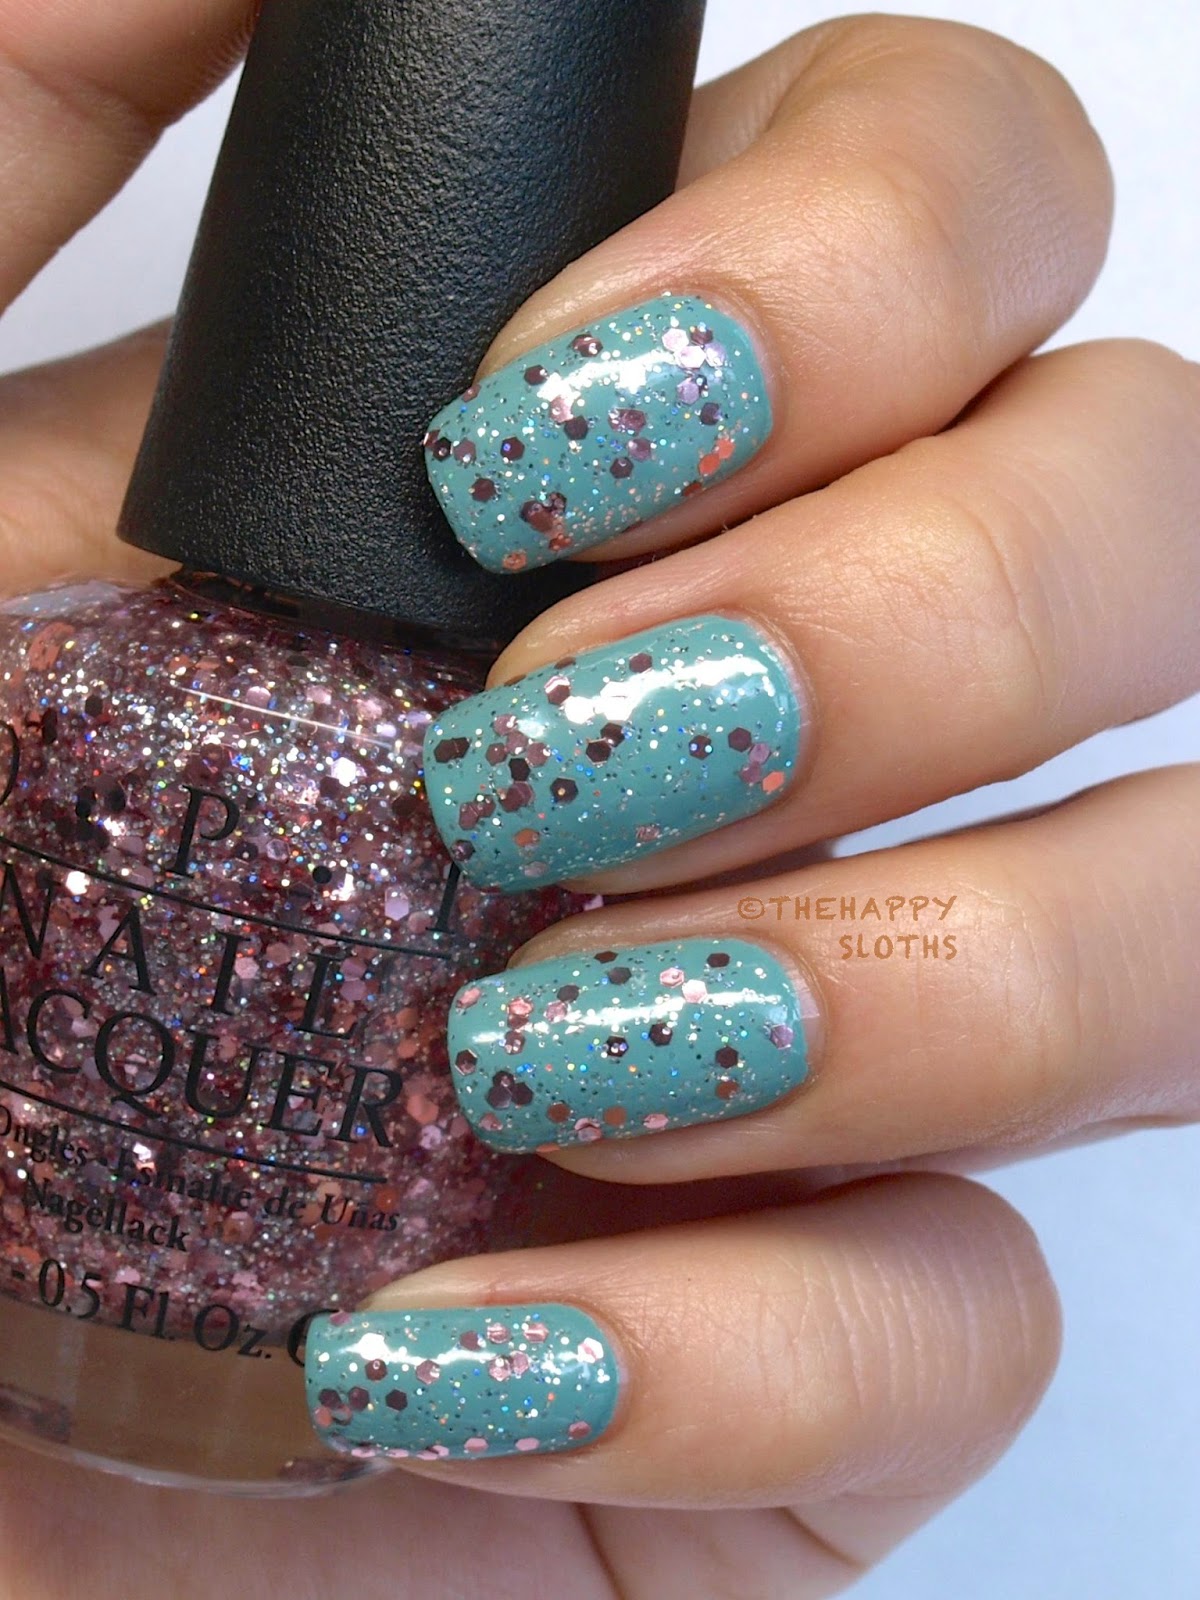 OPI GelColor High Definition Glitter collection